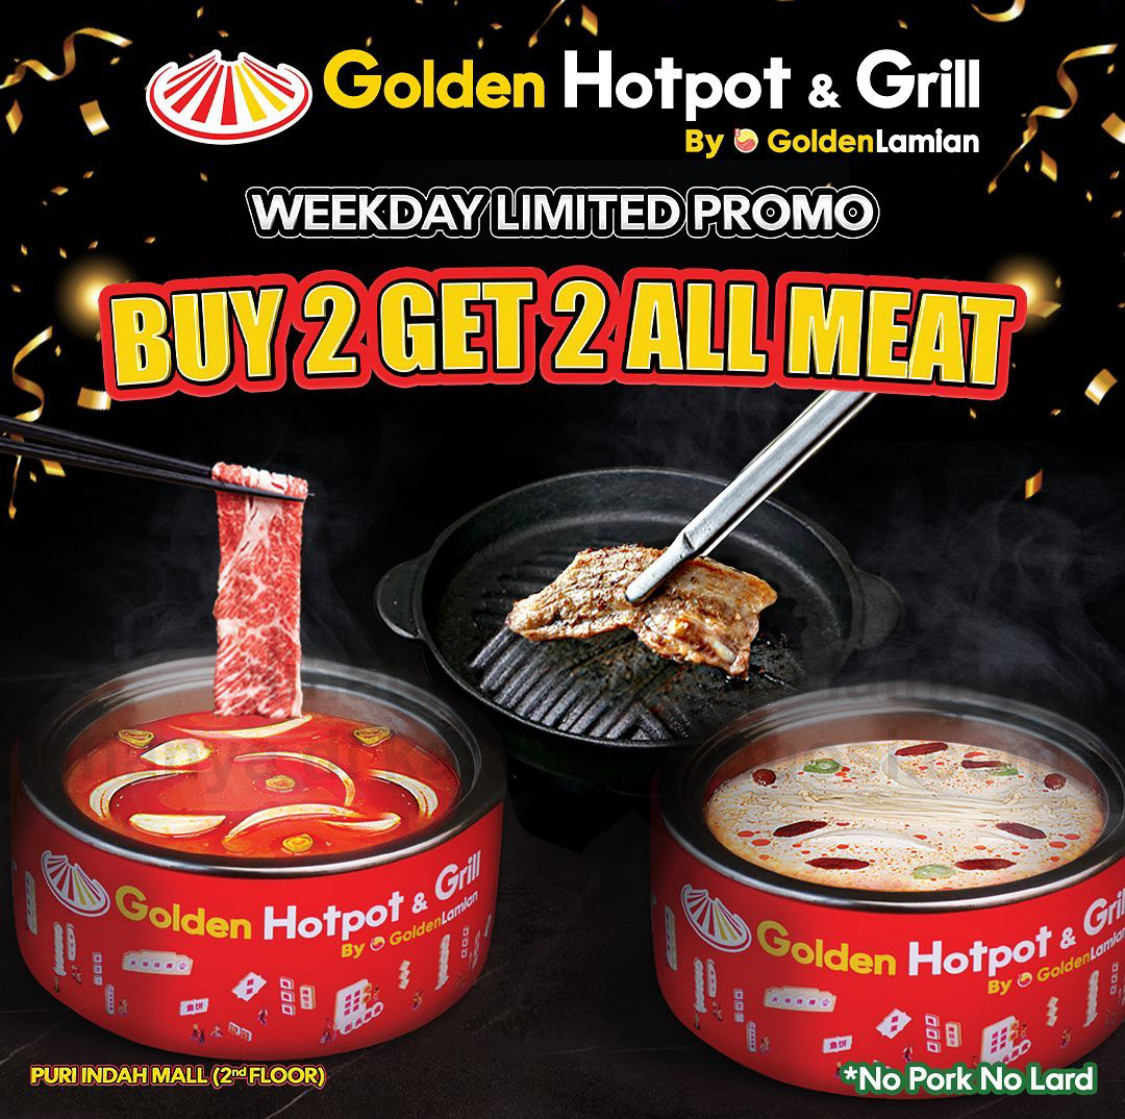 Promo GOLDEN HOTPOT AND GRILL WEEKDAY PROMO - Buy 2 Get 2 ALL MEAT